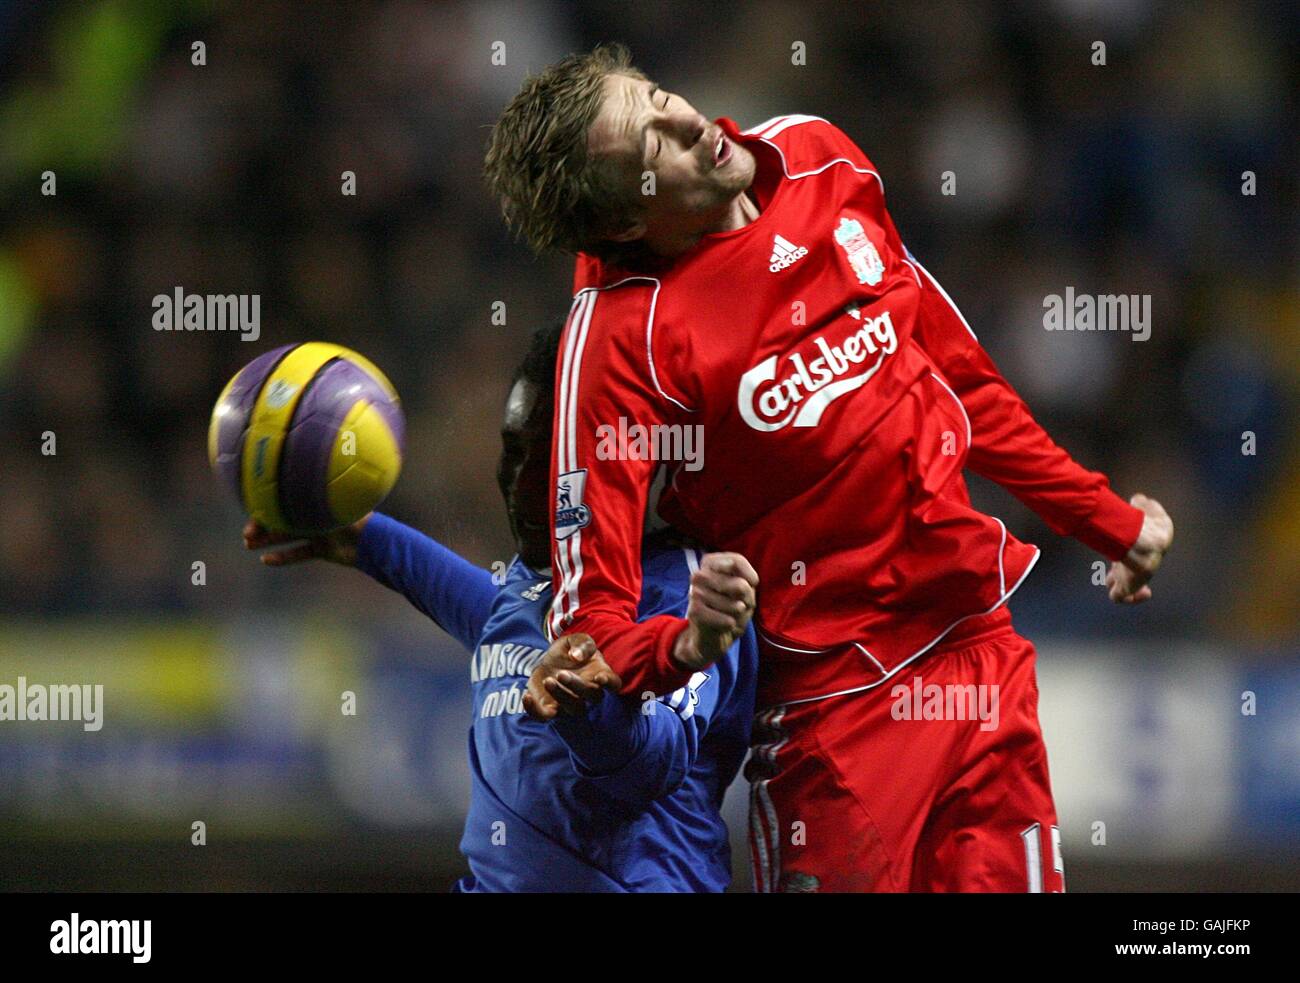 Soccer - Barclays Premier League - Chelsea v Liverpool - Stamford Bridge. Liverpool's Peter Crouch (right) and Chelsea's John Mikel Obi battle for the ball. Stock Photo